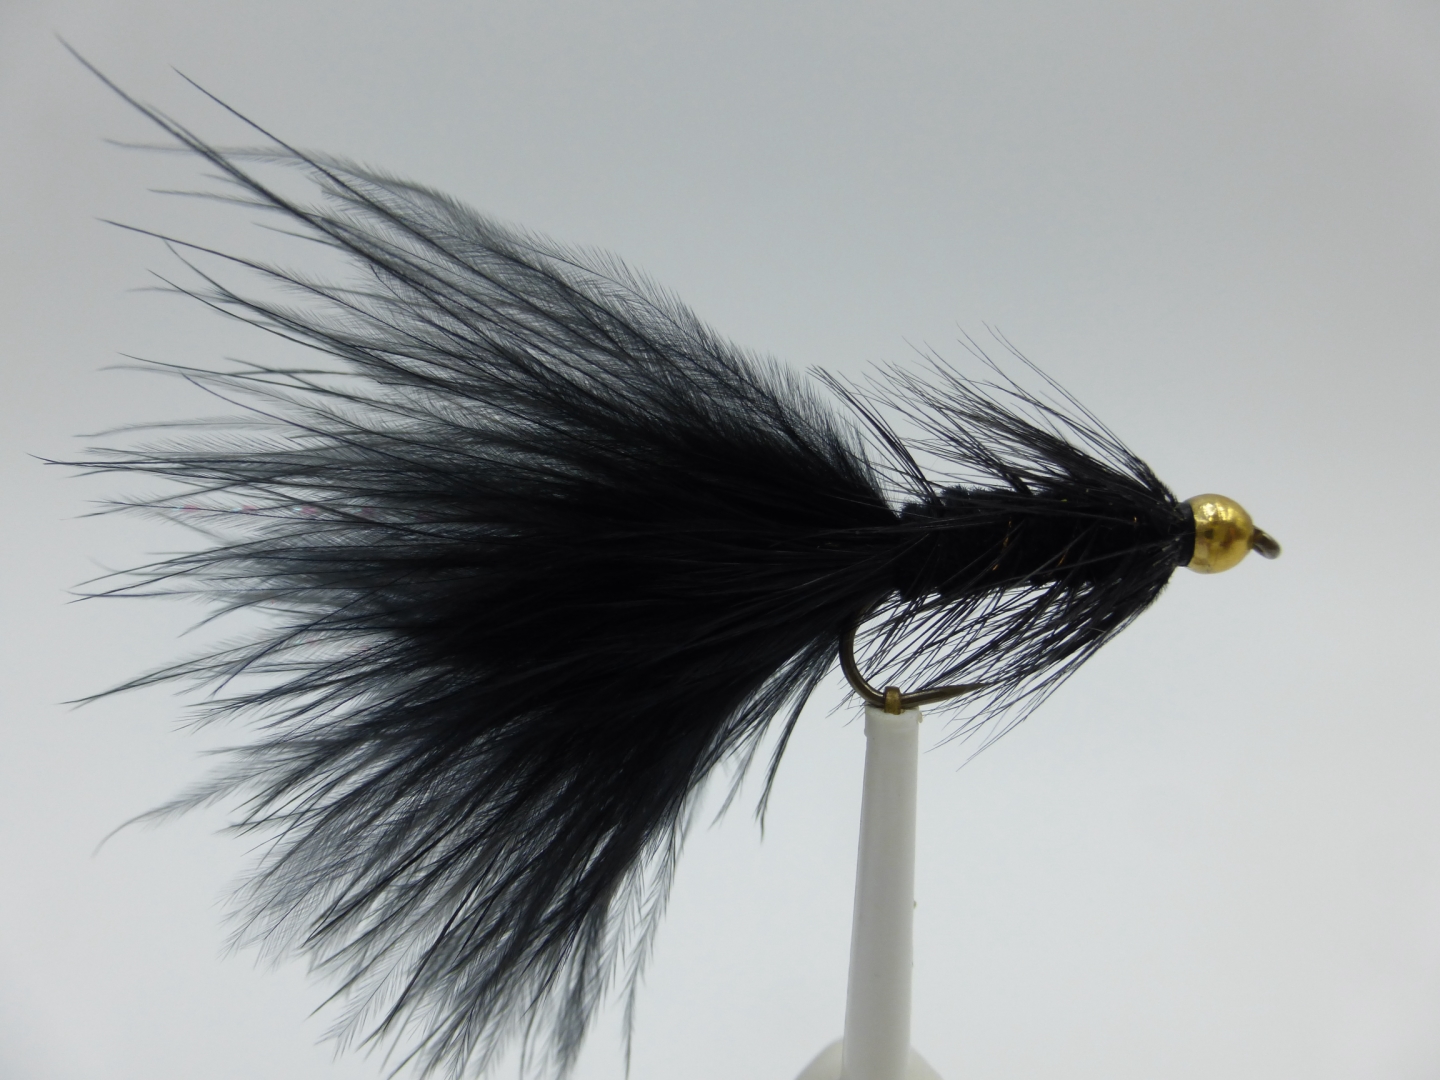 Size 10 Wooly Bugger Black Bead Head  Barbless